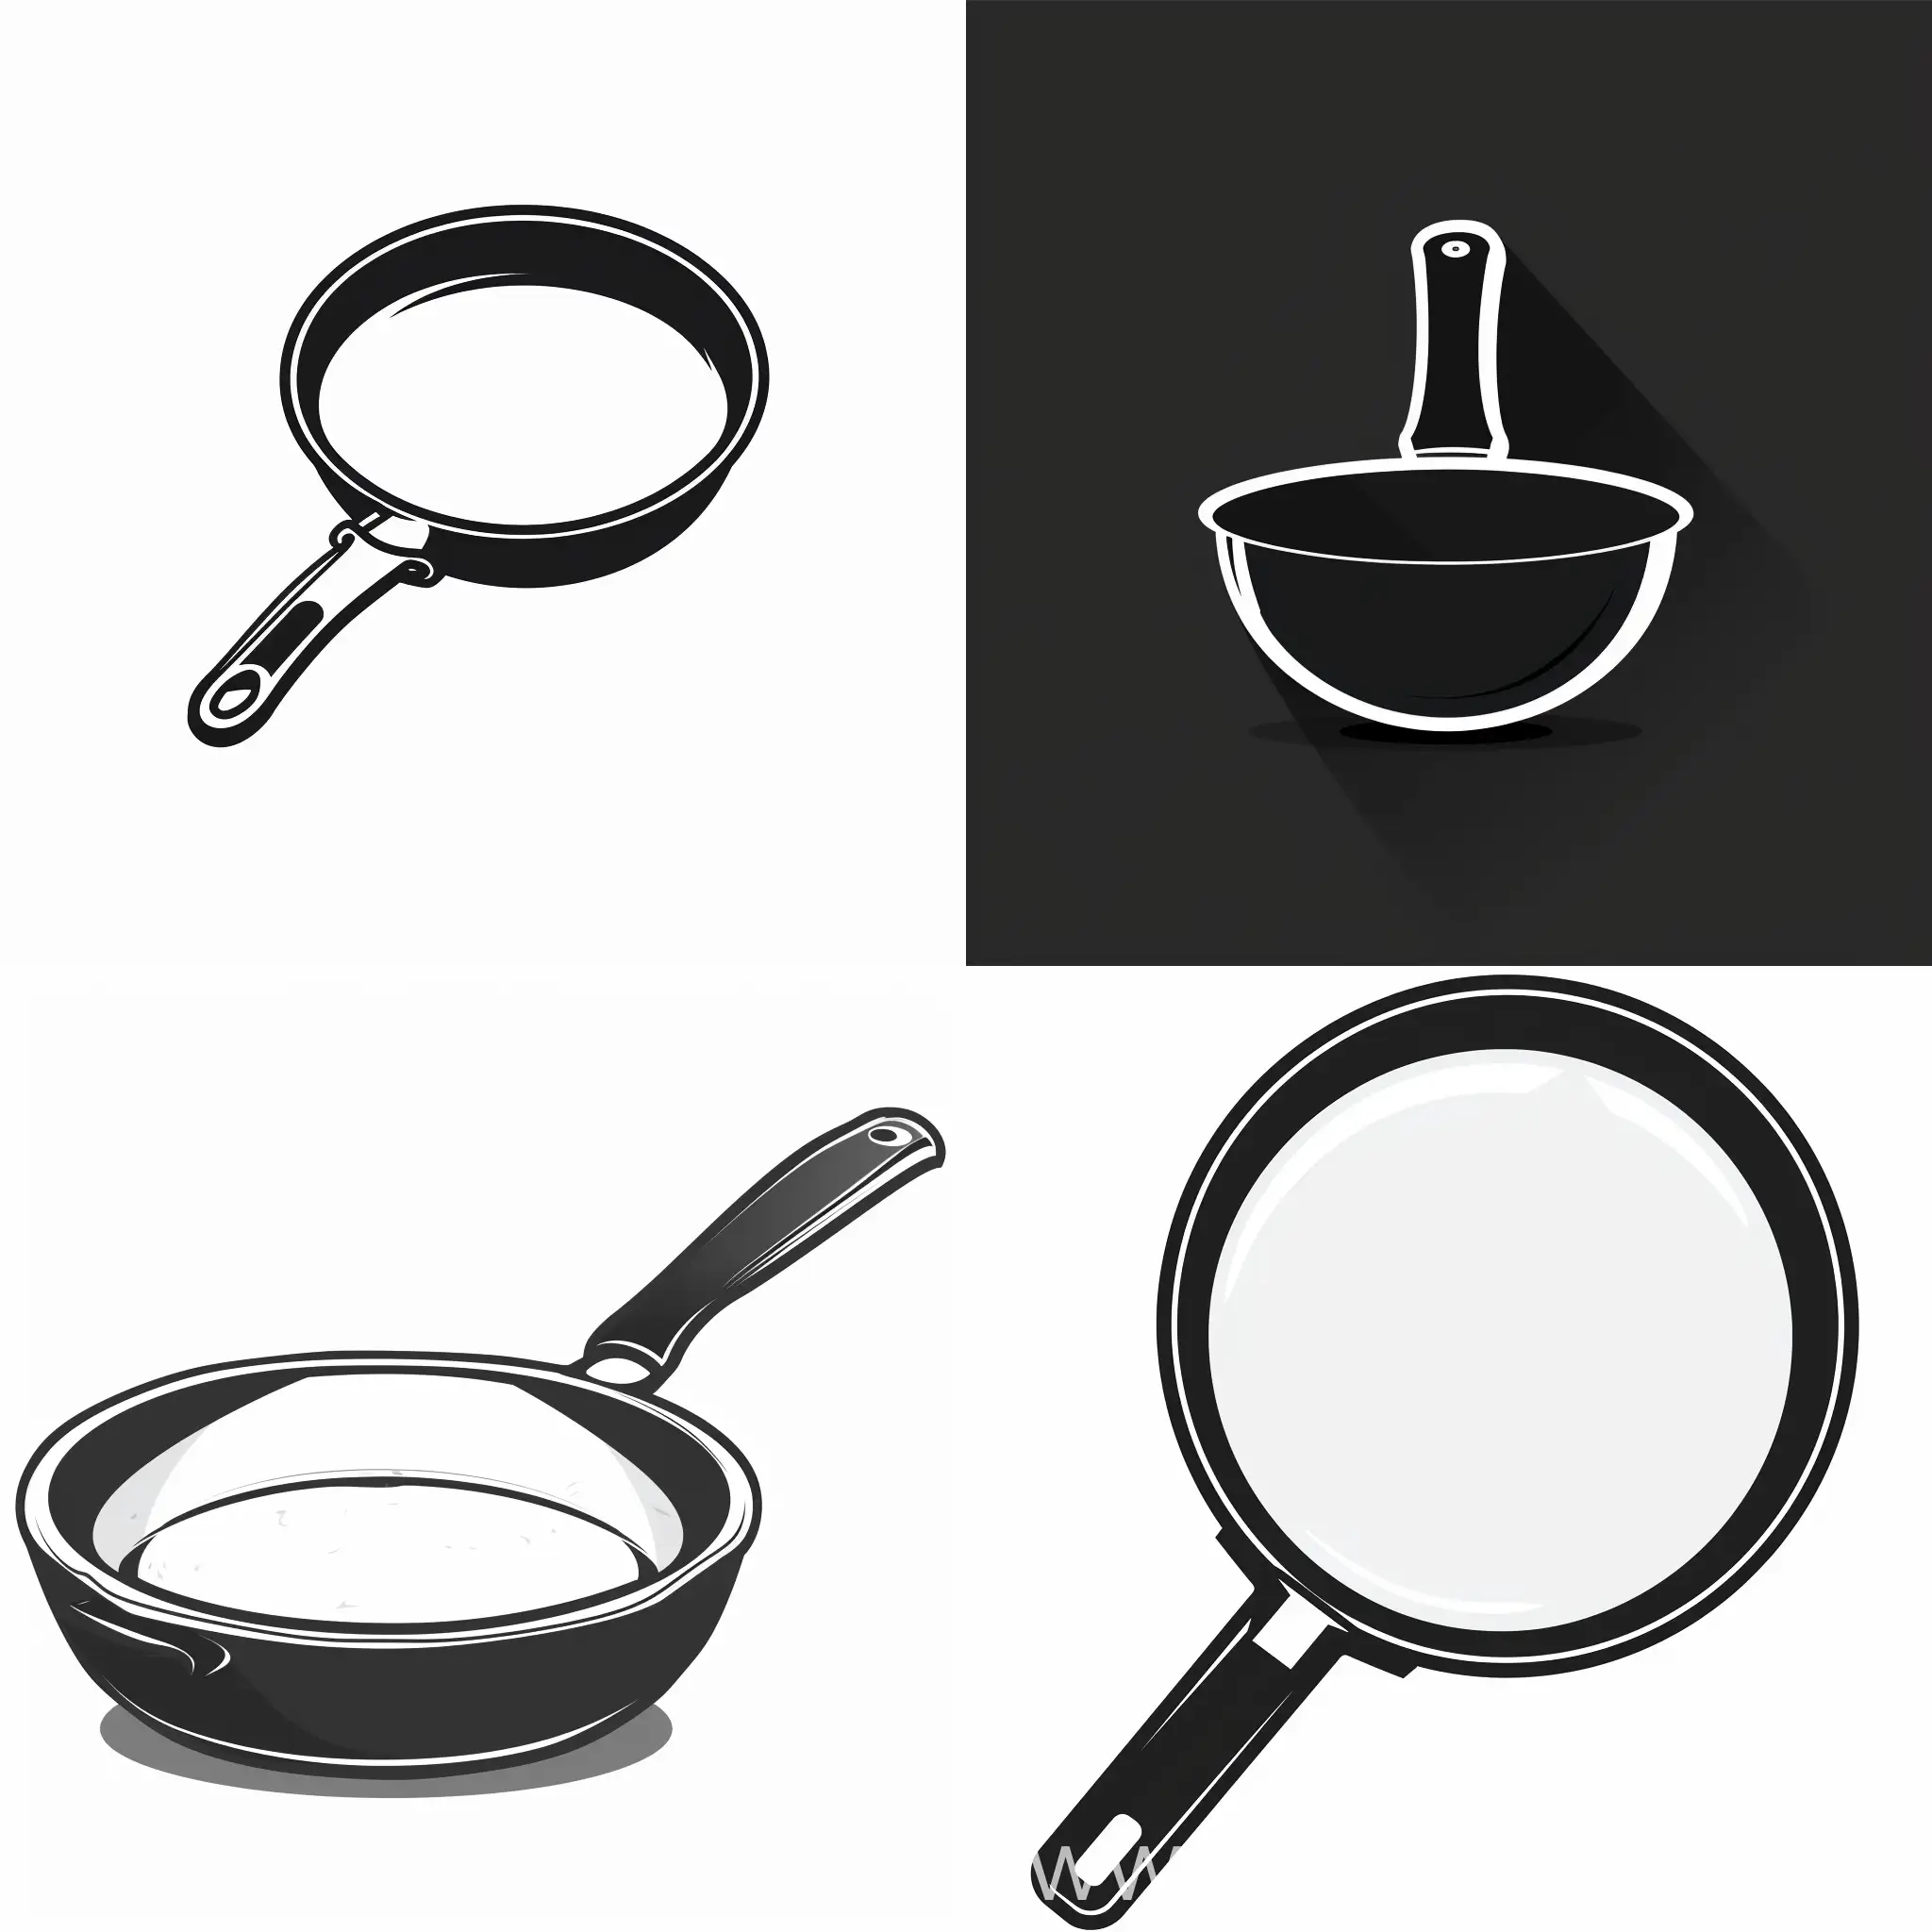 Cooking-Utensil-Icon-Simple-Black-and-White-Frying-Pan